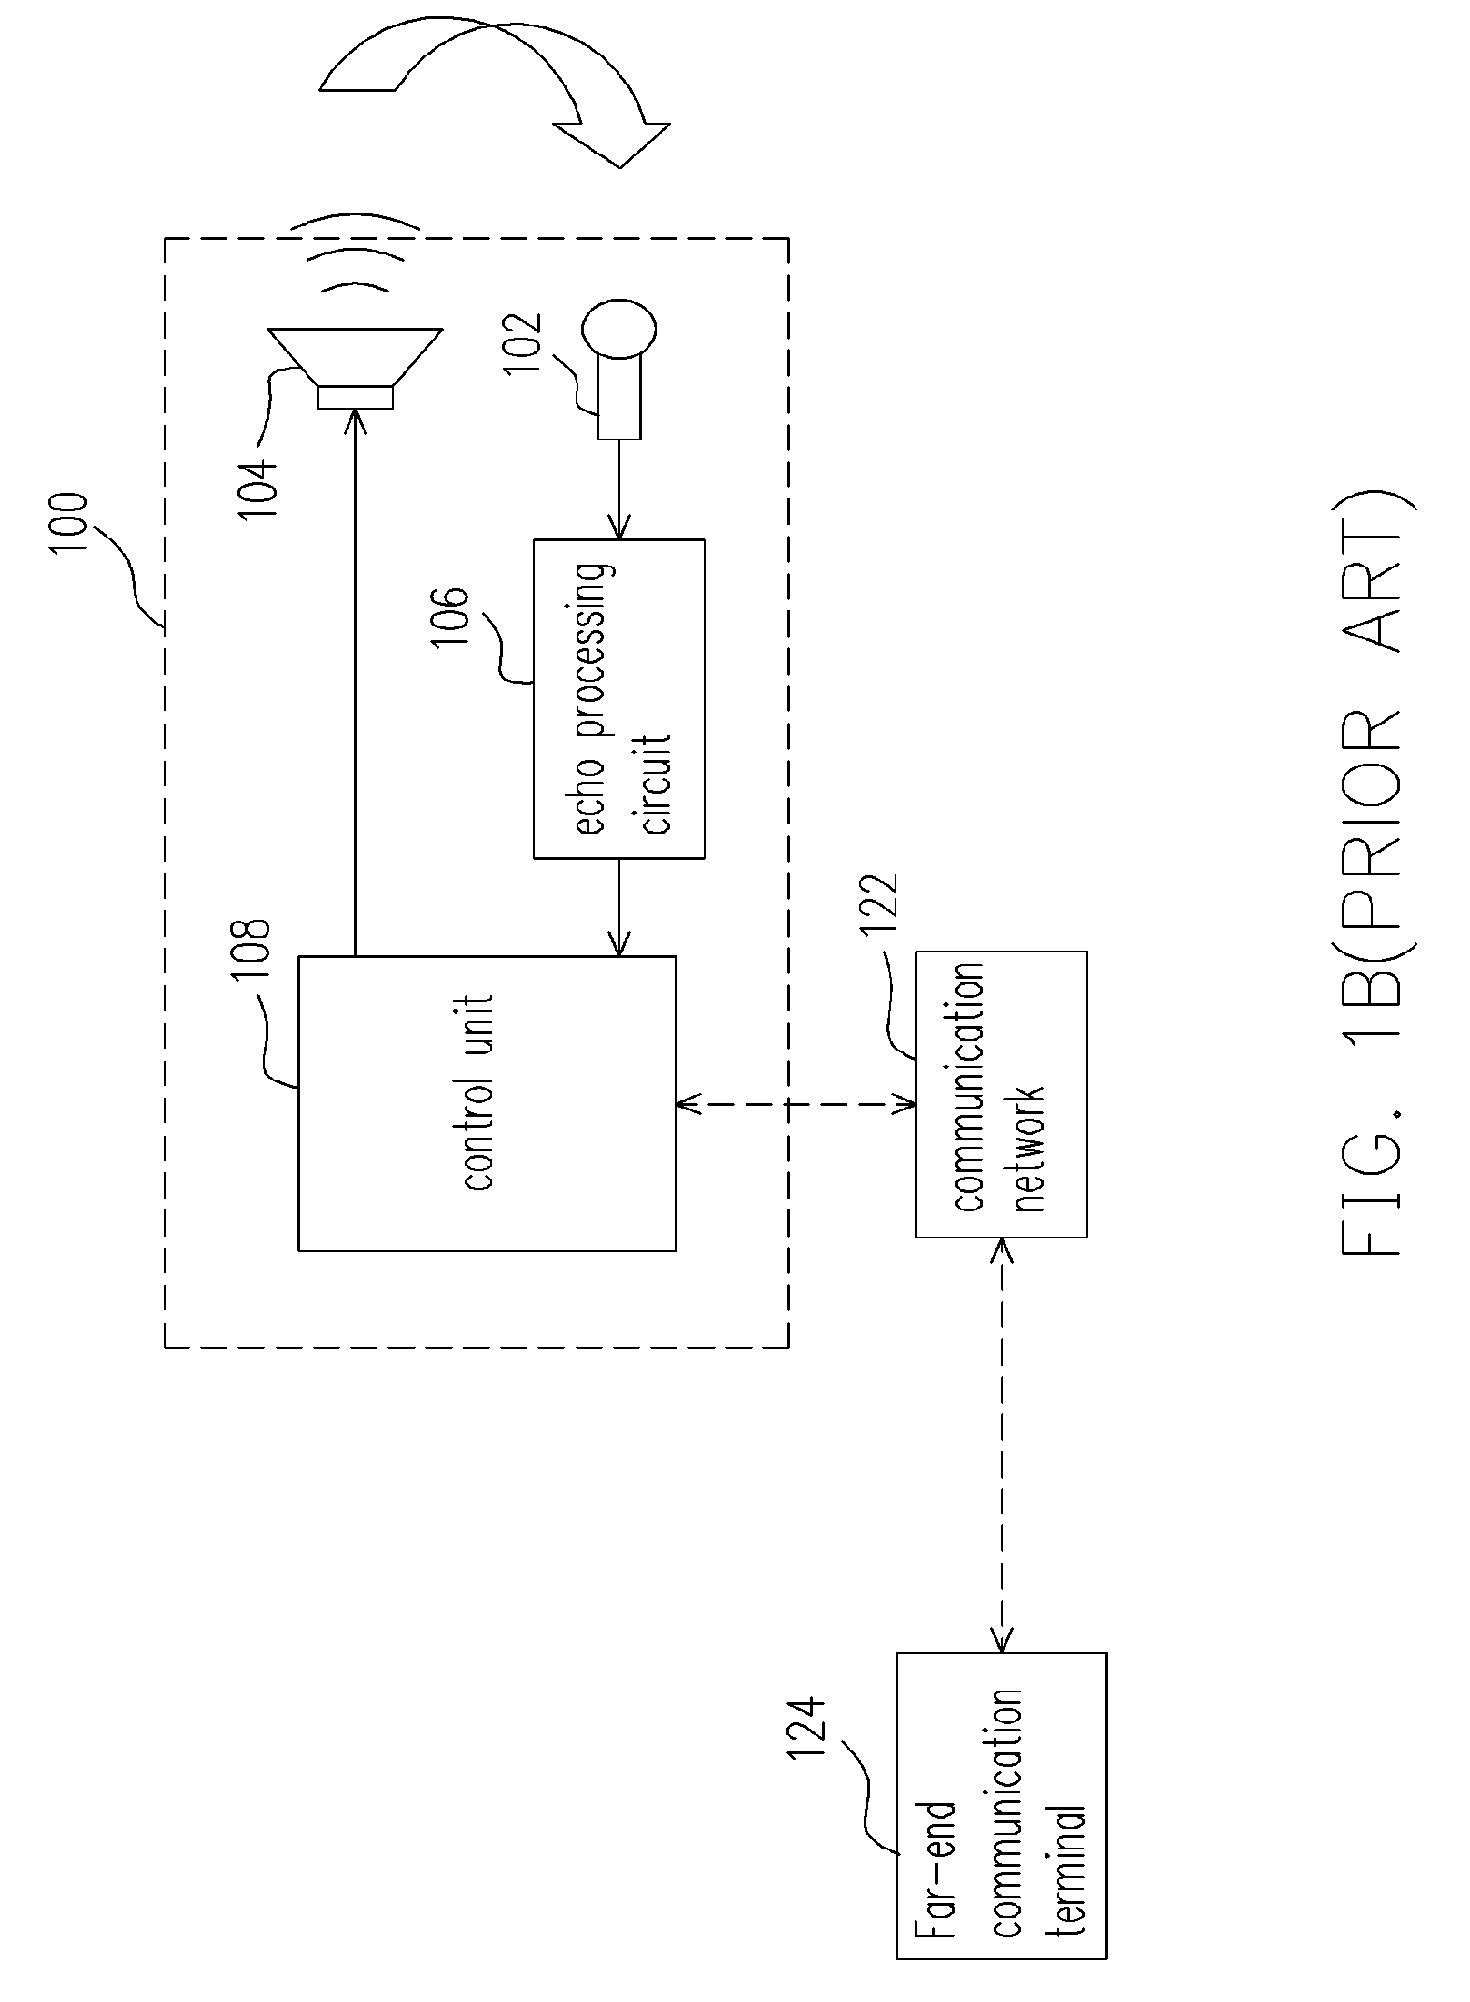 Dual microphone communication device for teleconference